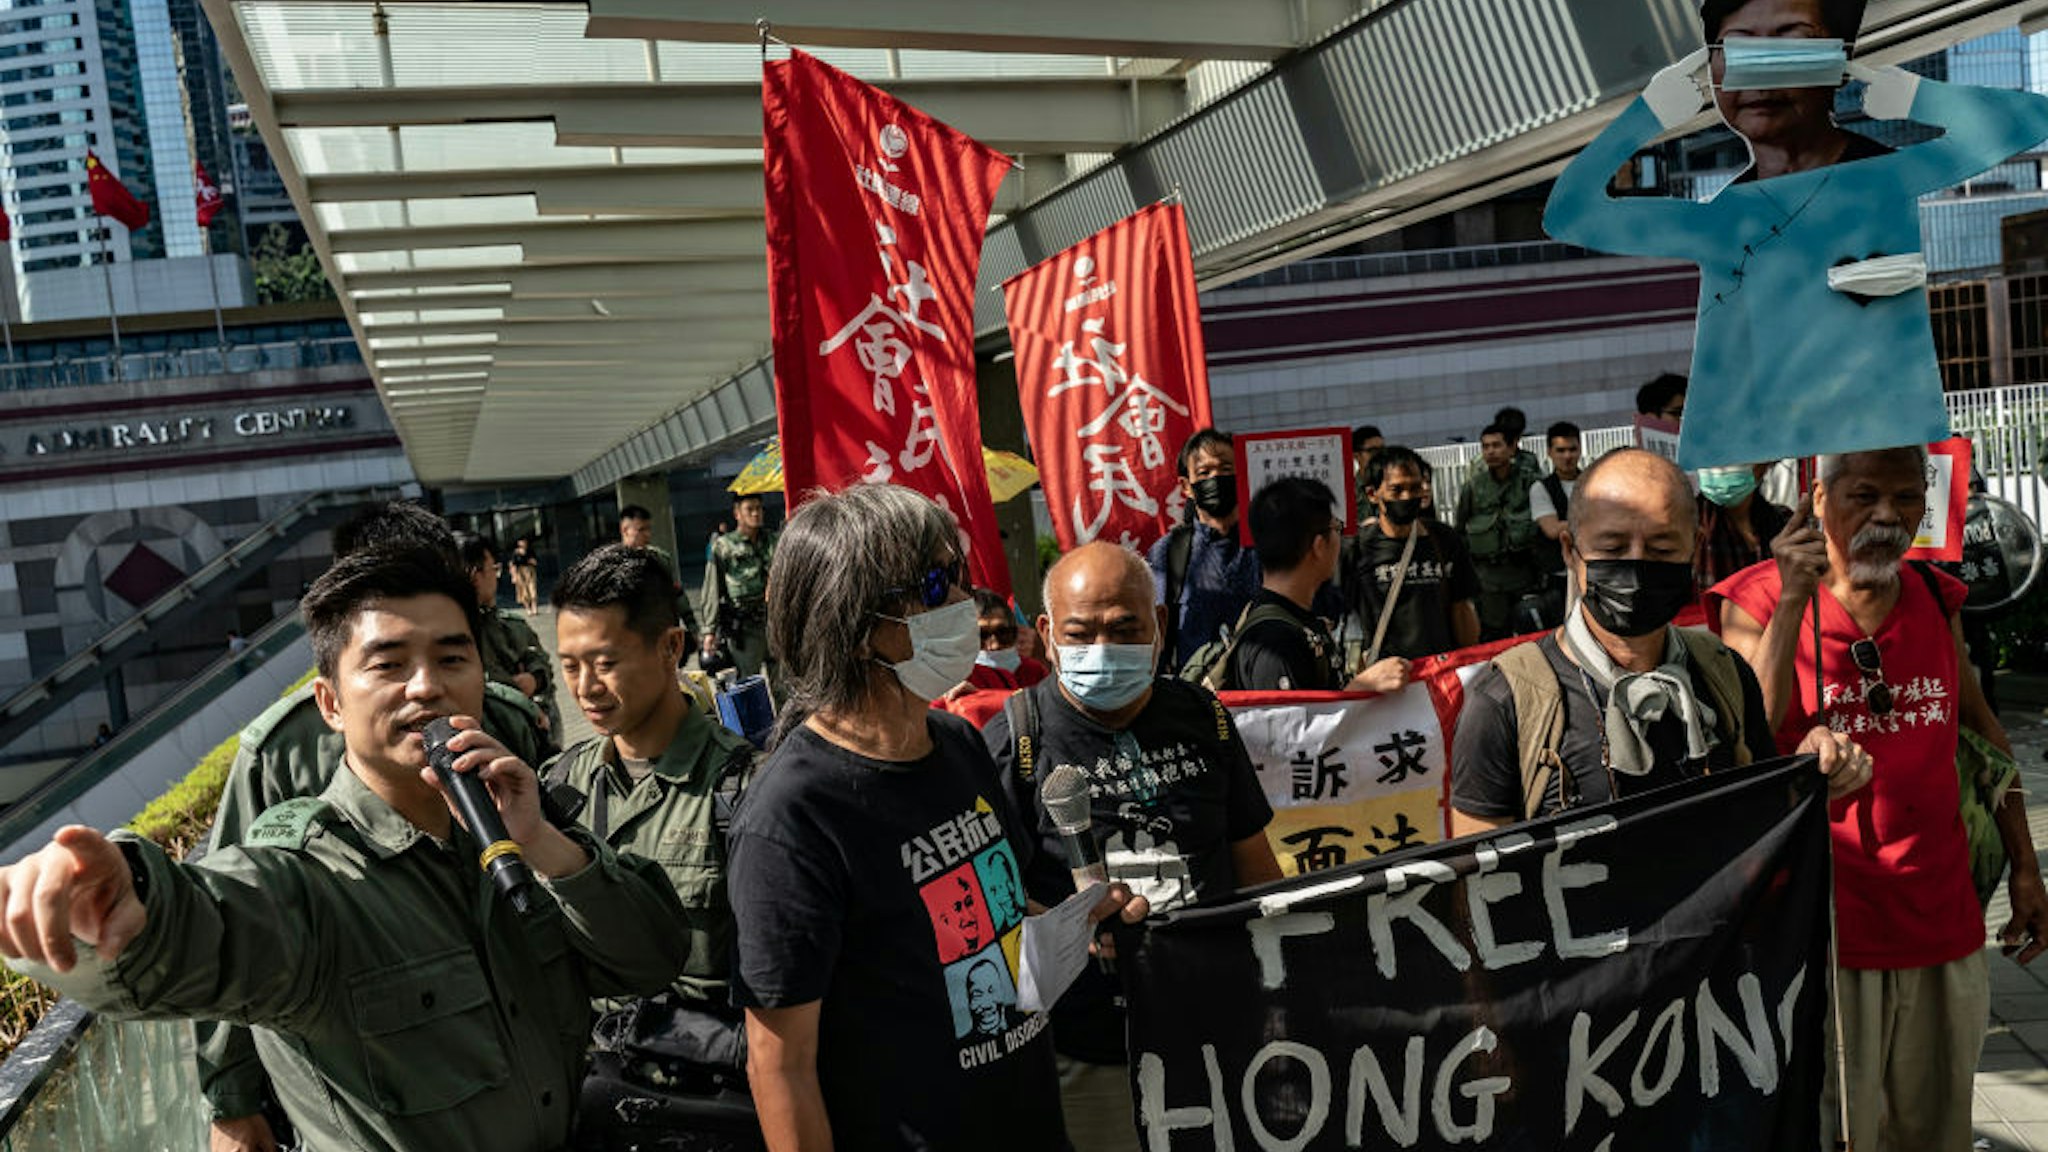 Pro-democracy protesters hold banners as they march during a rally ahead of Hong Kong Chief Executive Carrie Lams annual policy speech outside of Central Government Complex on October 16, 2019 in Hong Kong, China.